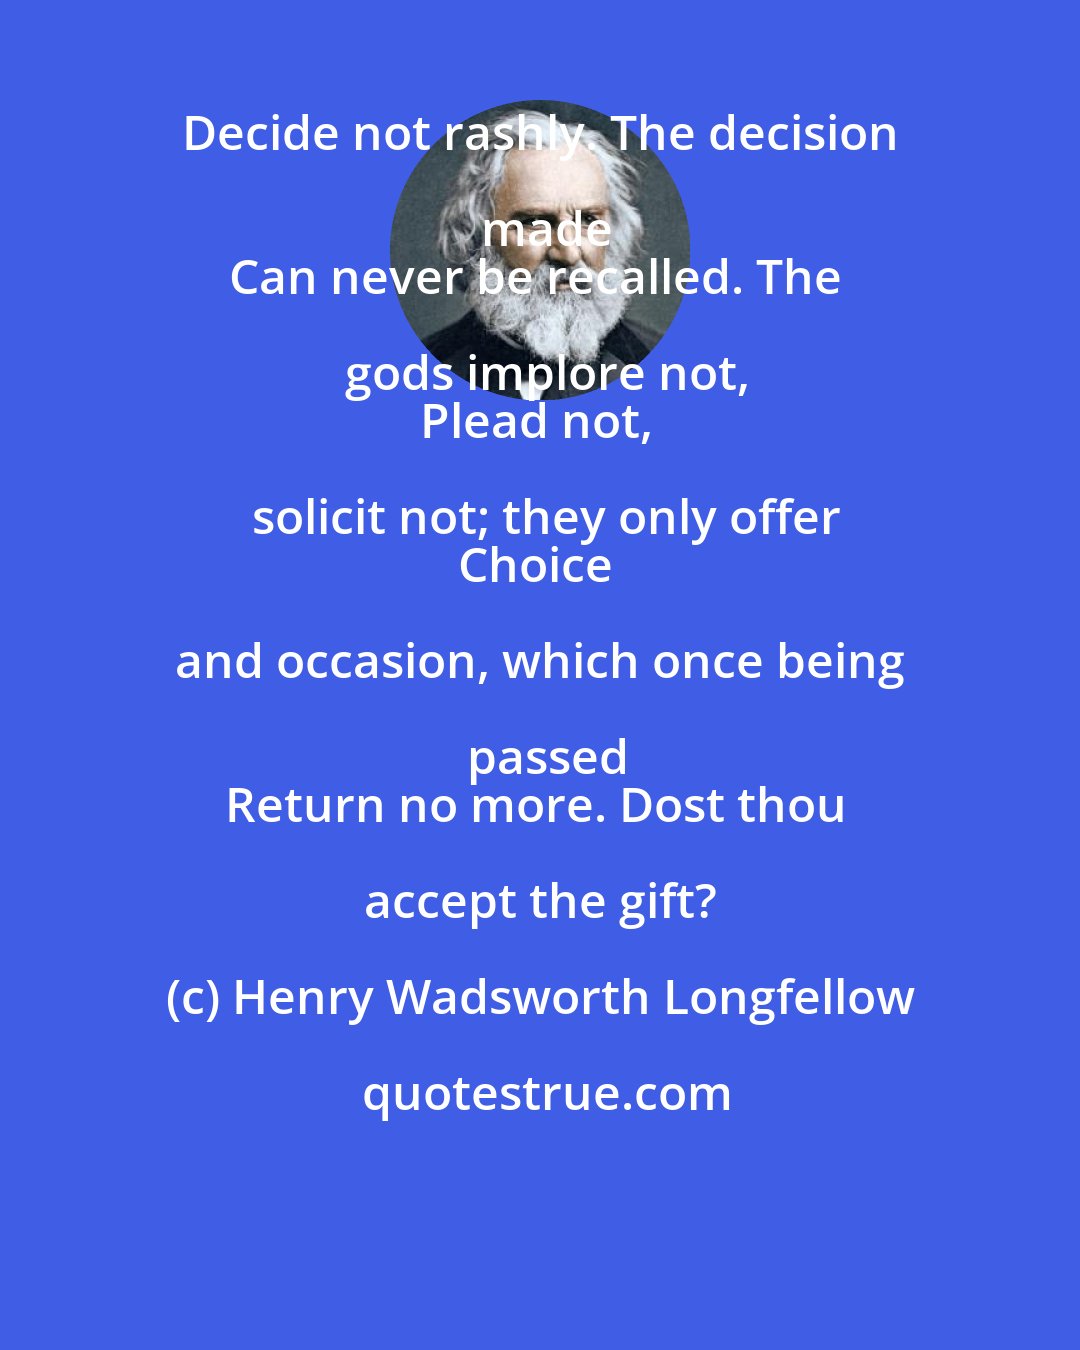 Henry Wadsworth Longfellow: Decide not rashly. The decision made
Can never be recalled. The gods implore not,
Plead not, solicit not; they only offer
Choice and occasion, which once being passed
Return no more. Dost thou accept the gift?